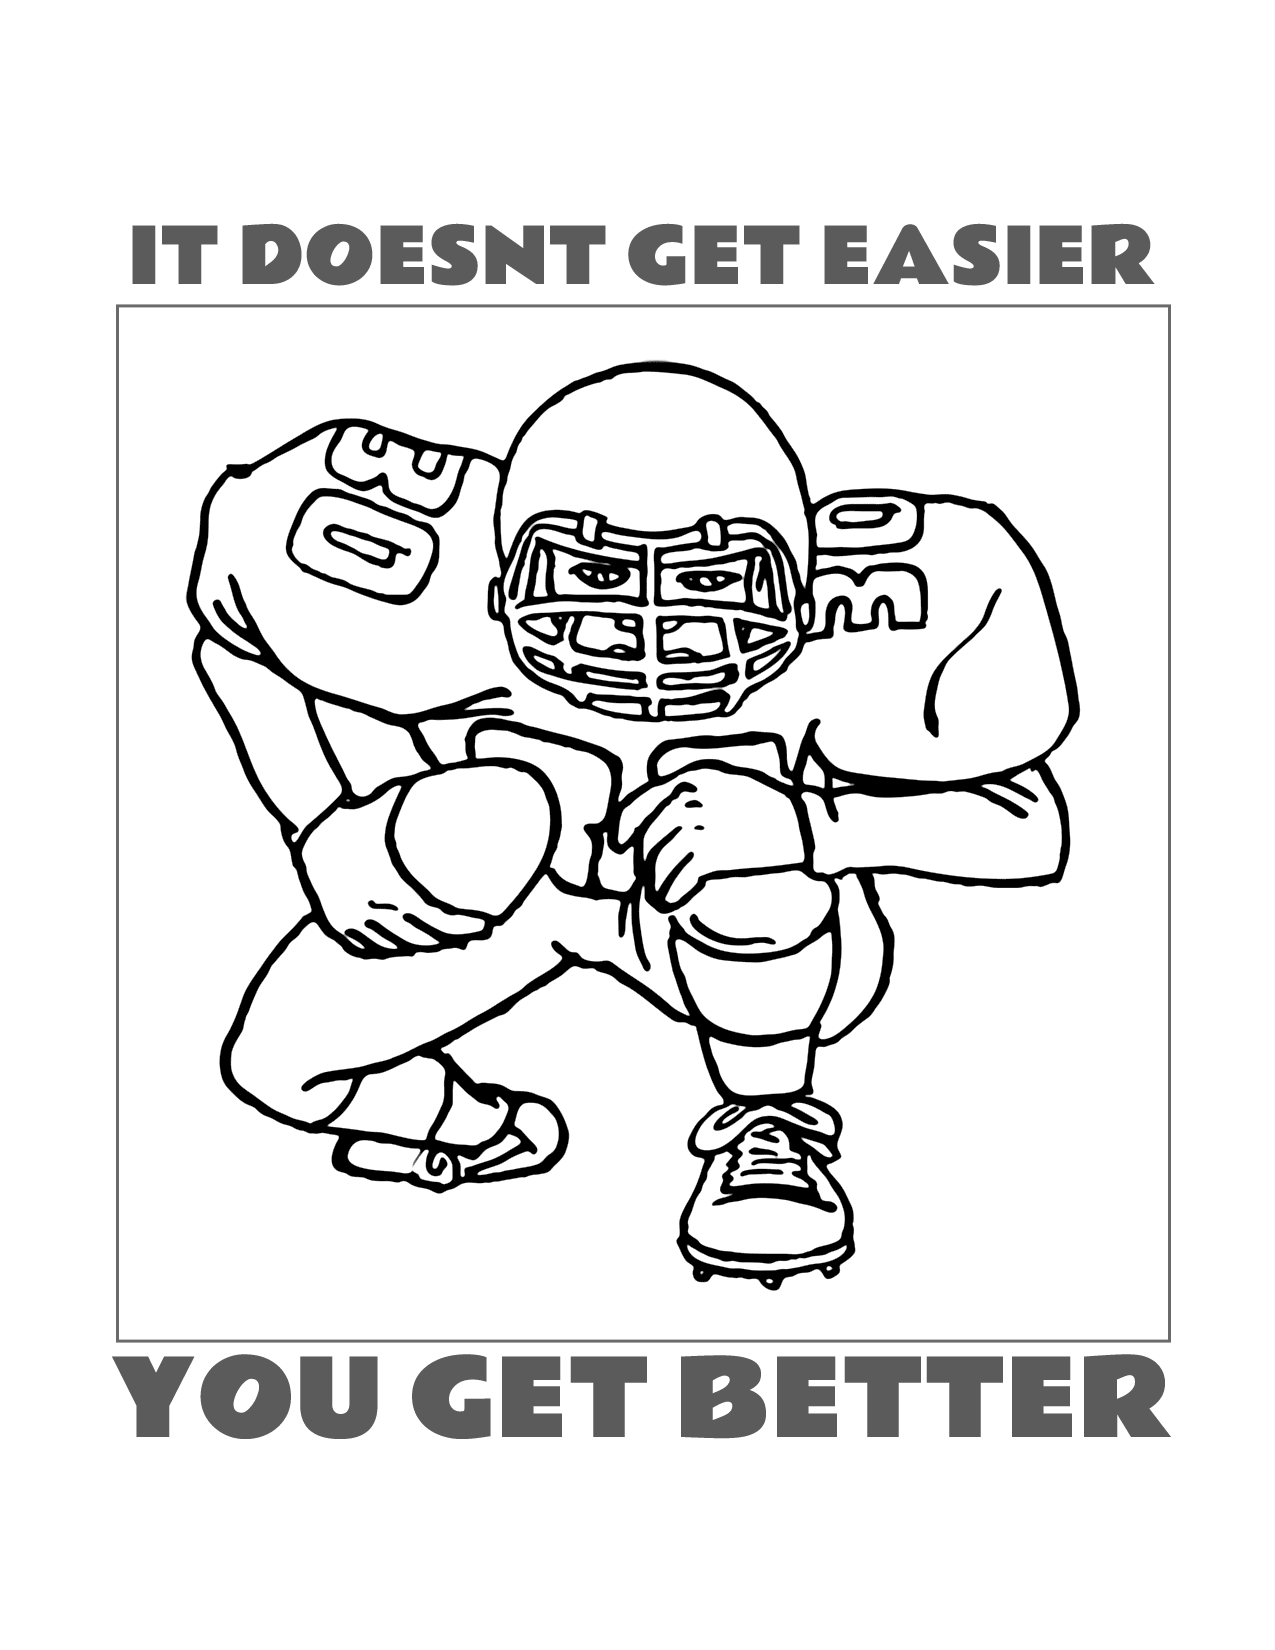 Football Motivational Coloring Page